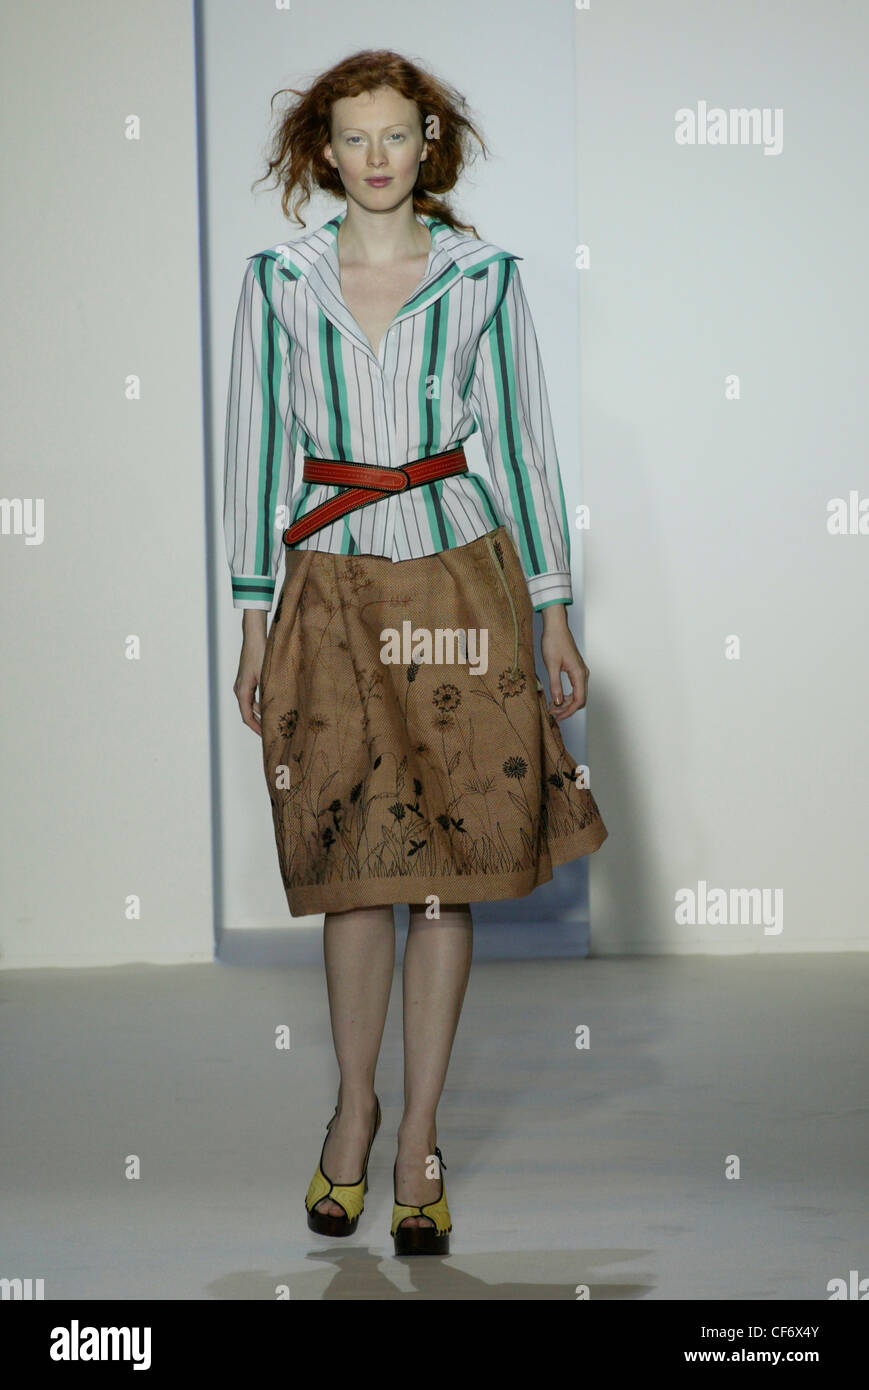 Marni Milan Spring Summer Model, Karen Elson long red hair tied loosely back off face wearing white and green vertically Stock Photo